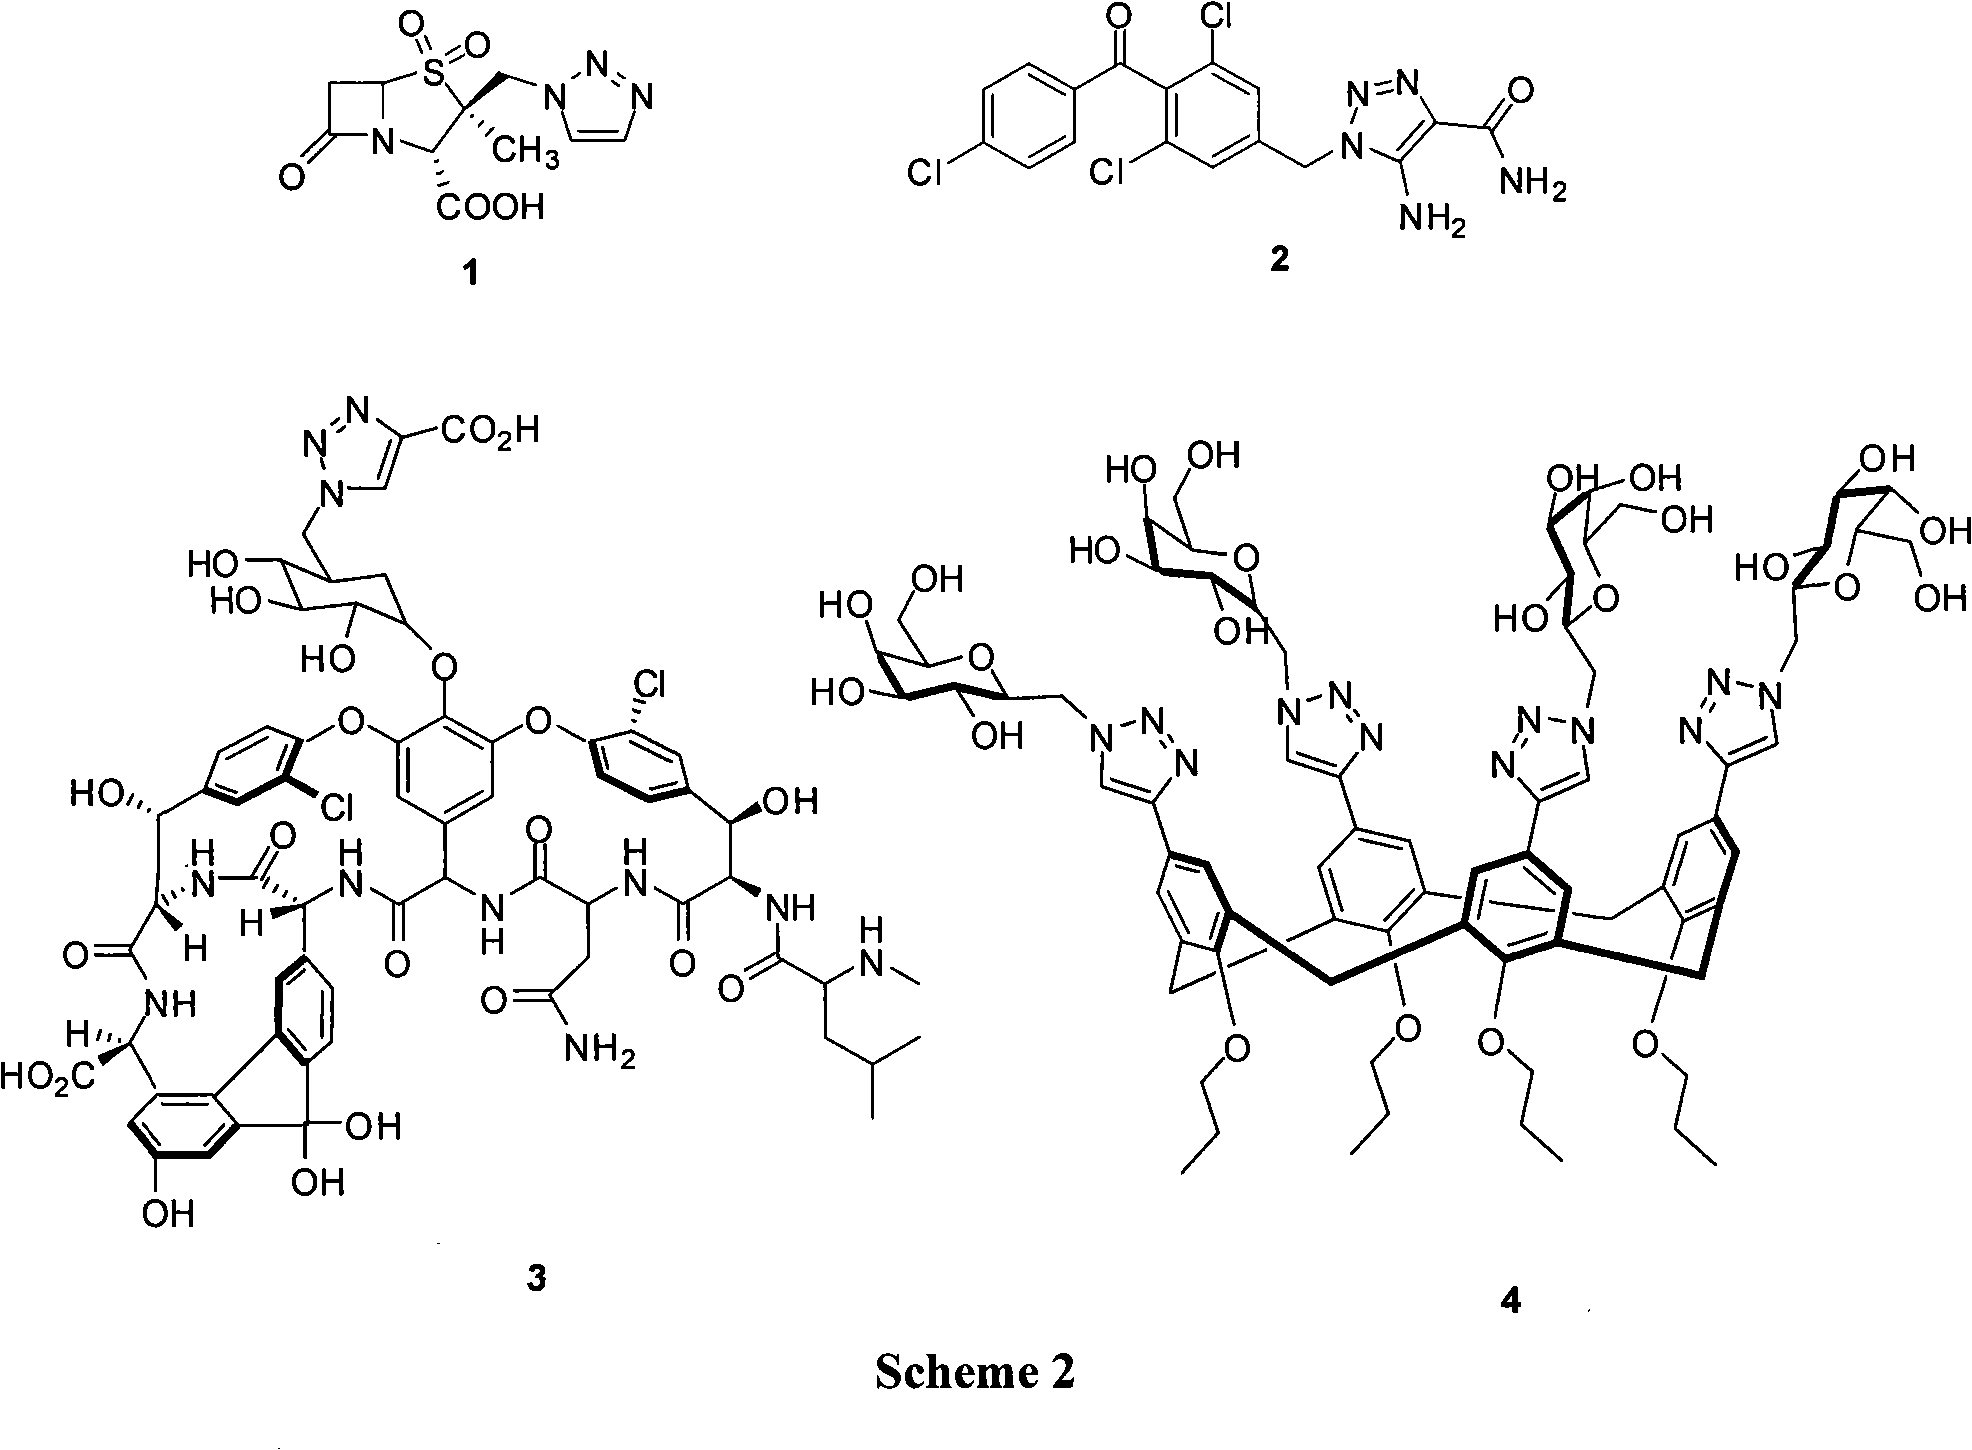 Method for synthesizing 1-substituted-1,2,3-tolyltriazole